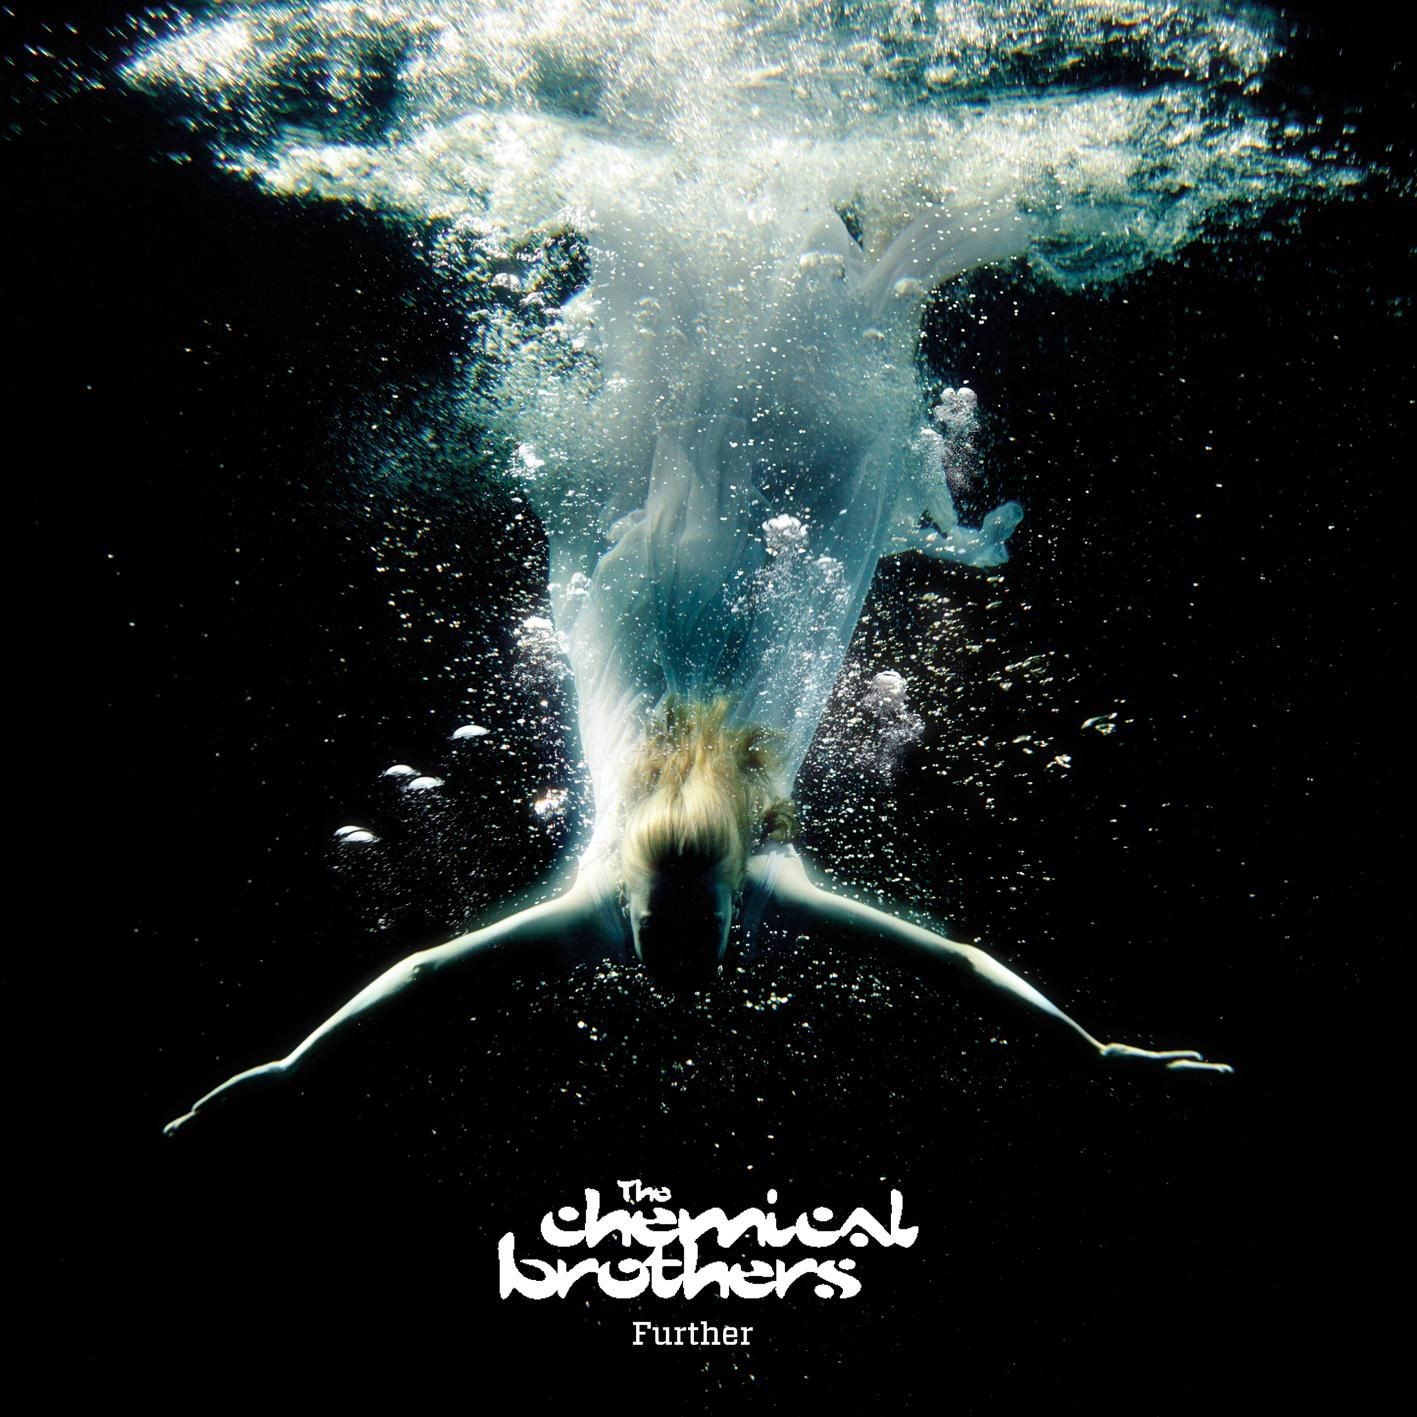 Road to Joy: The Chemical Brothers - Further